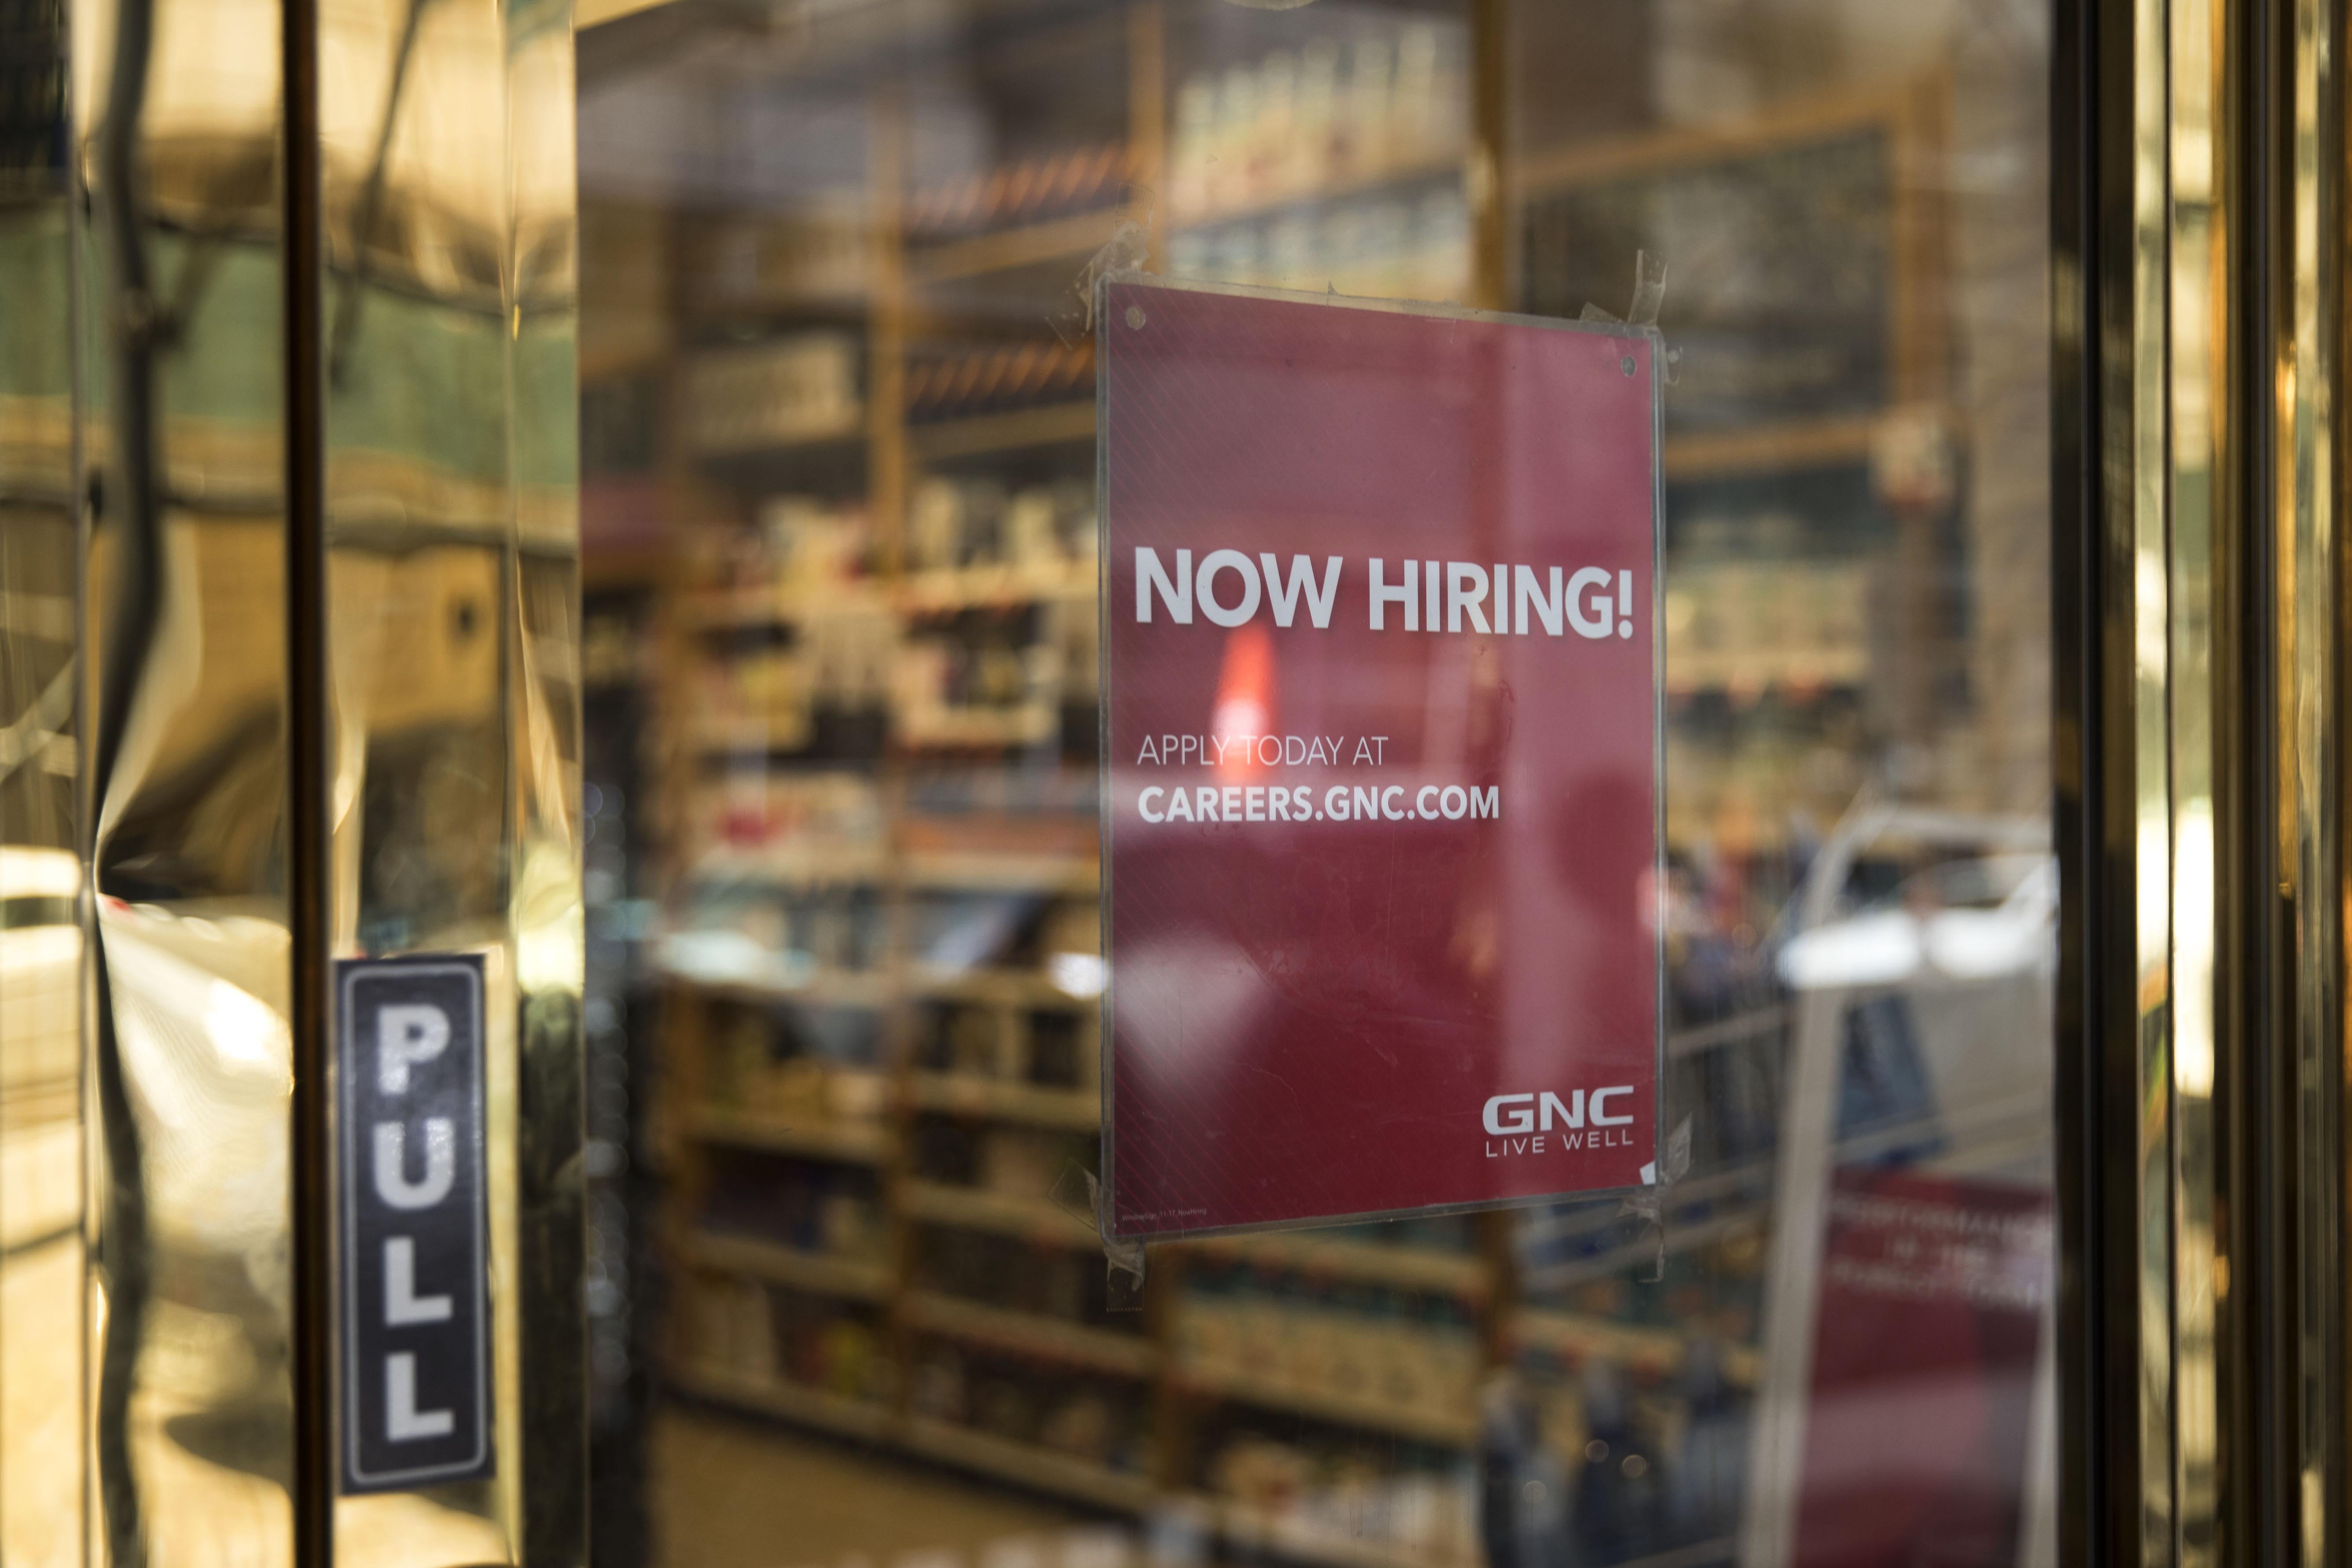 NEW YORK, NY - MAY 4: A 'now hiring' sign hangs on the door of a GNC Nutrition store in Lower Manhattan, May 4, 2018 in New York City. U.S. unemployment fell to a near historic low of 3.9 percent and hiring remained strong in April. The Dow finished up over 300 points at the close on Friday. (Photo by Drew Angerer/Getty Images)